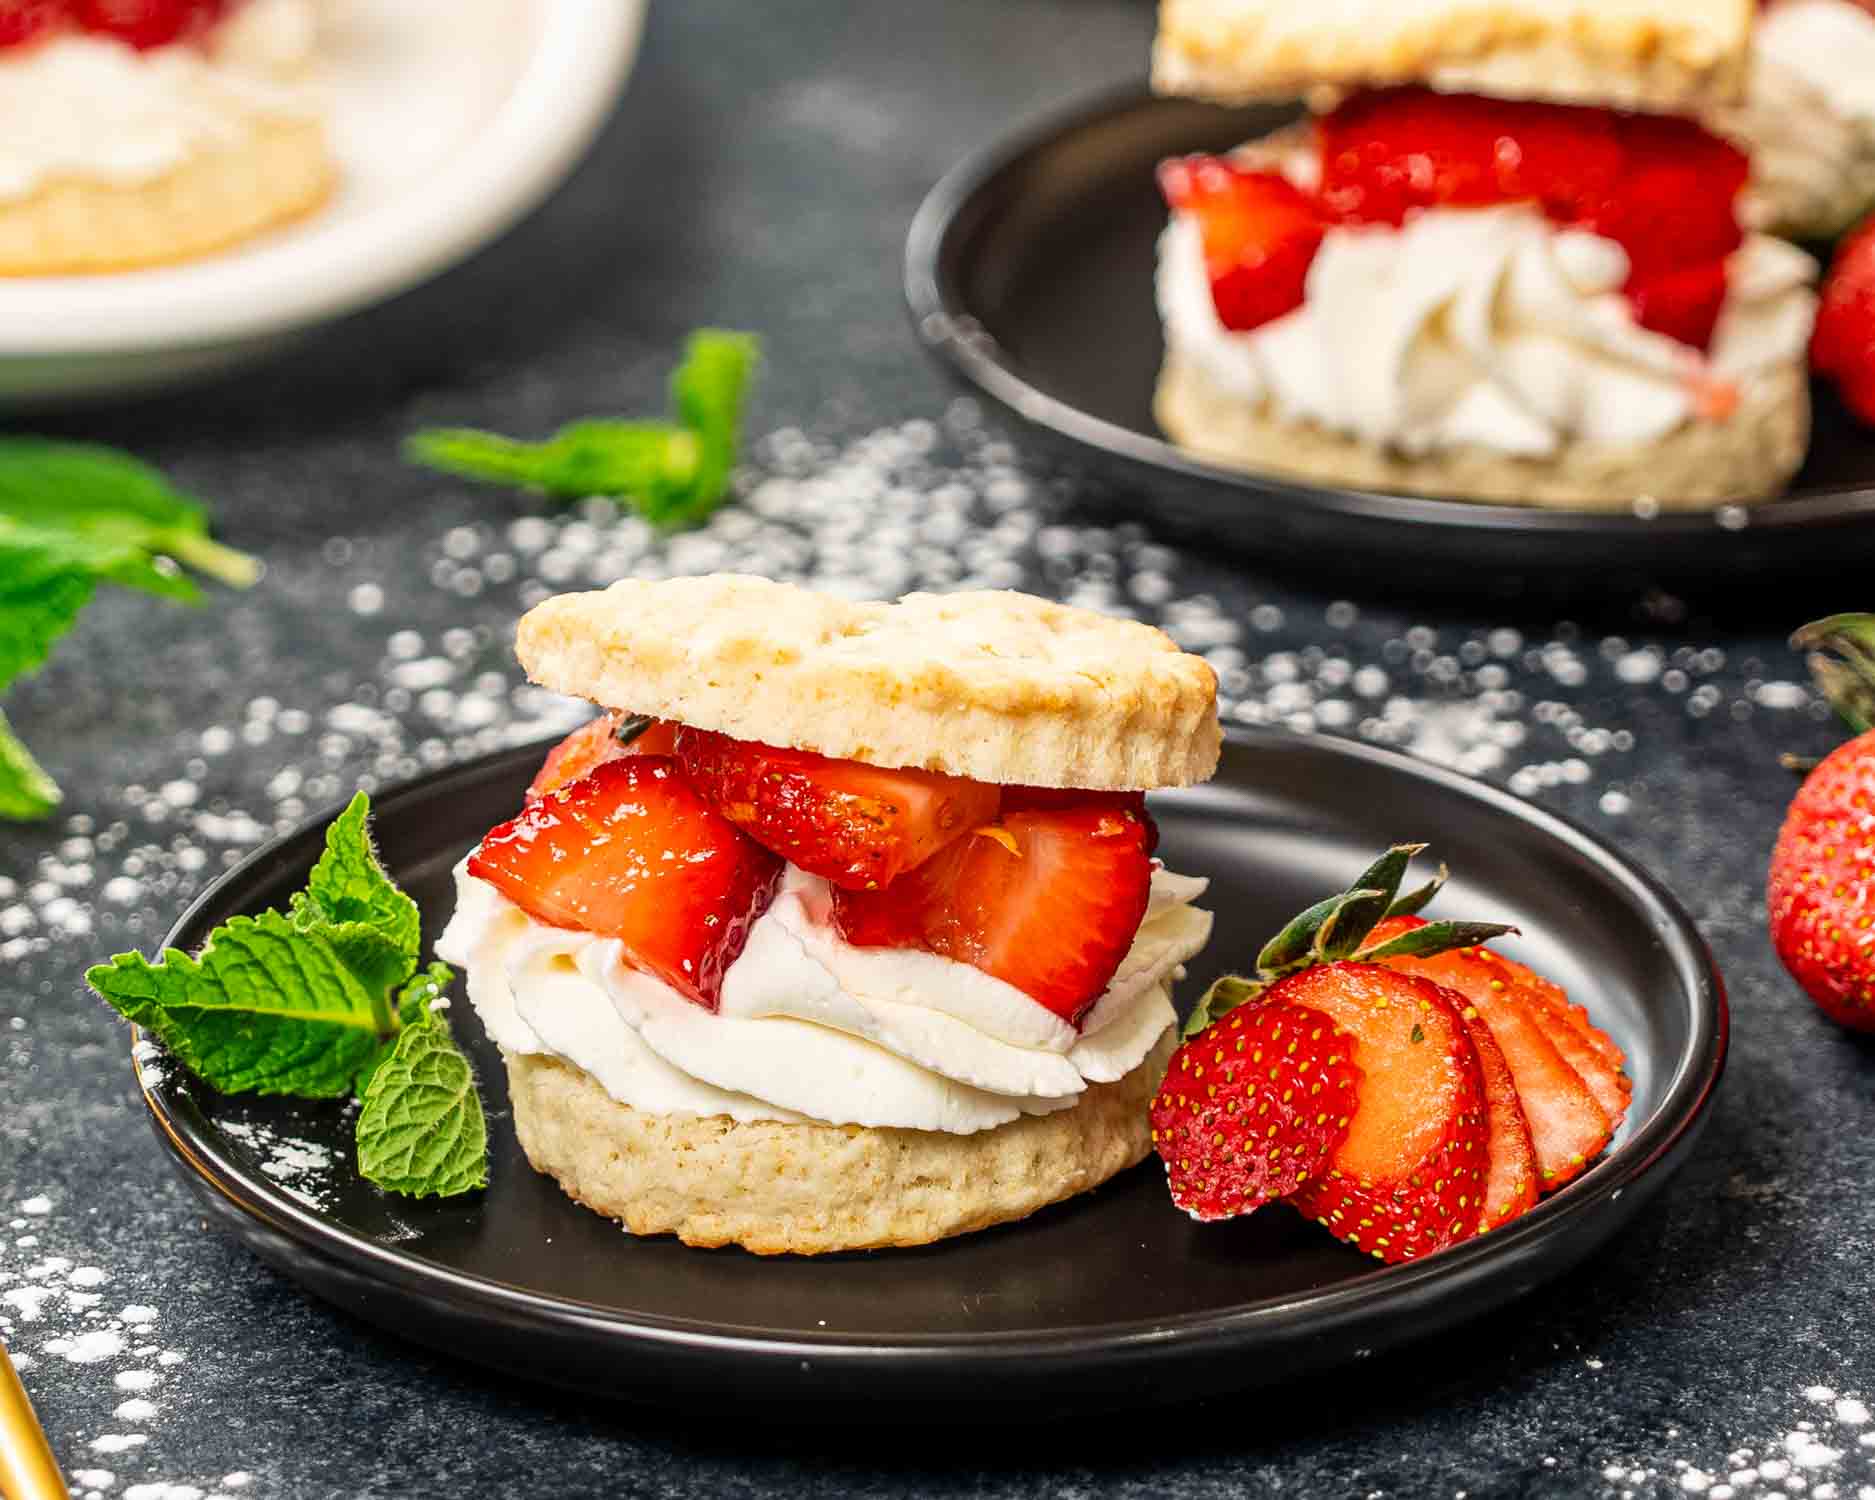 a strawberry shortcake on a black plate with a strawberry on the side and a mint leaf, sprinkled with powdered sugar.